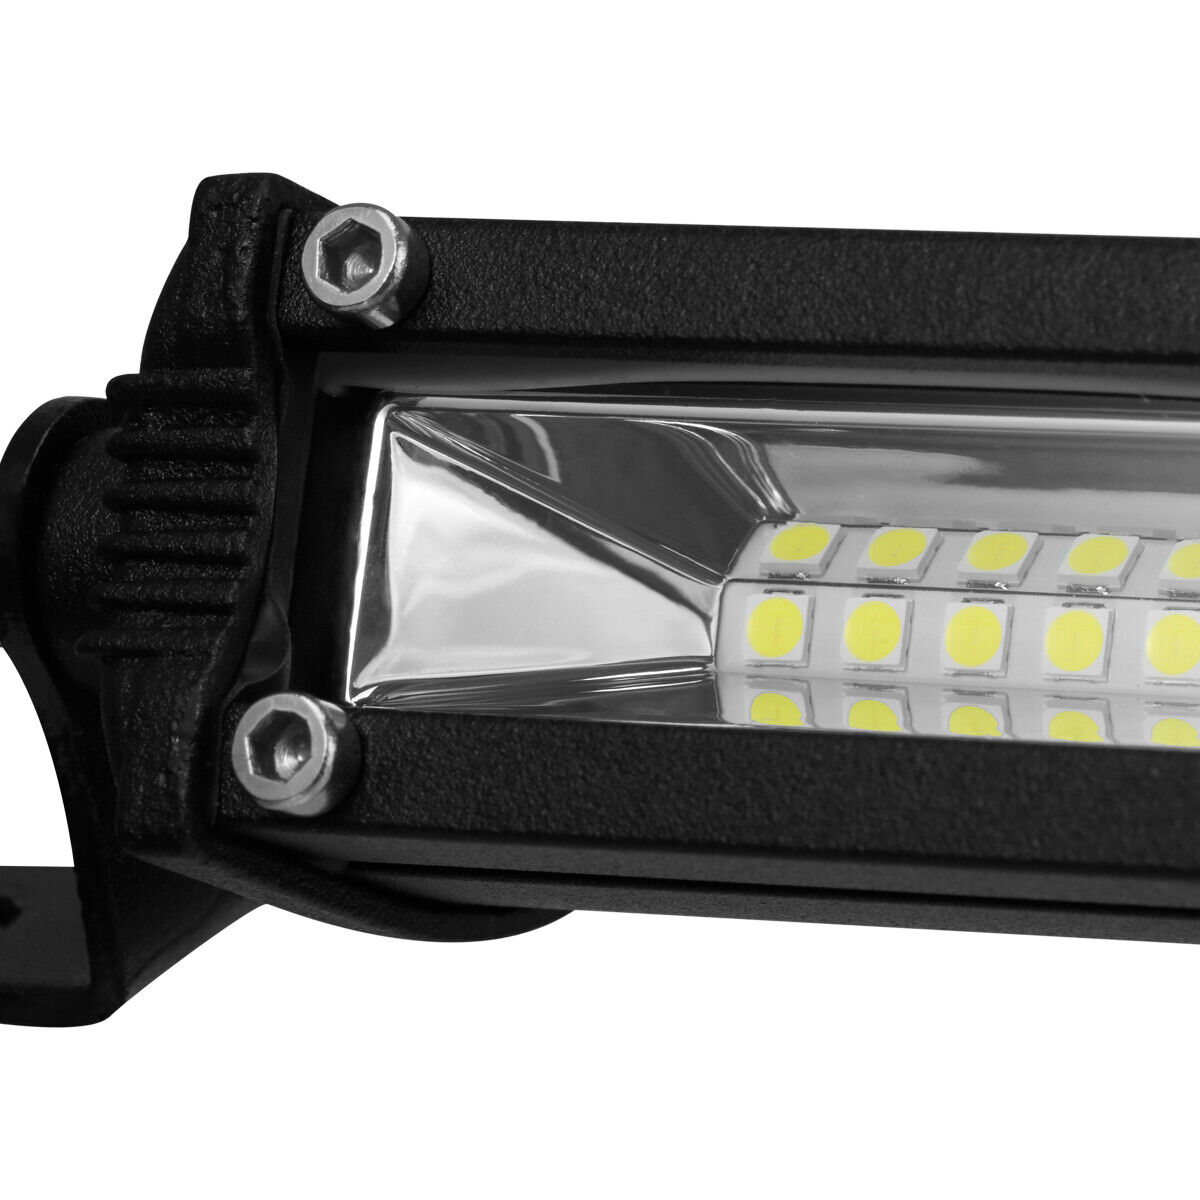 2x 12" inch 450W LED Work Light Bar Combo Spot Flood Driving Off Road SUV Boat Unbranded Does Not Apply - фотография #11